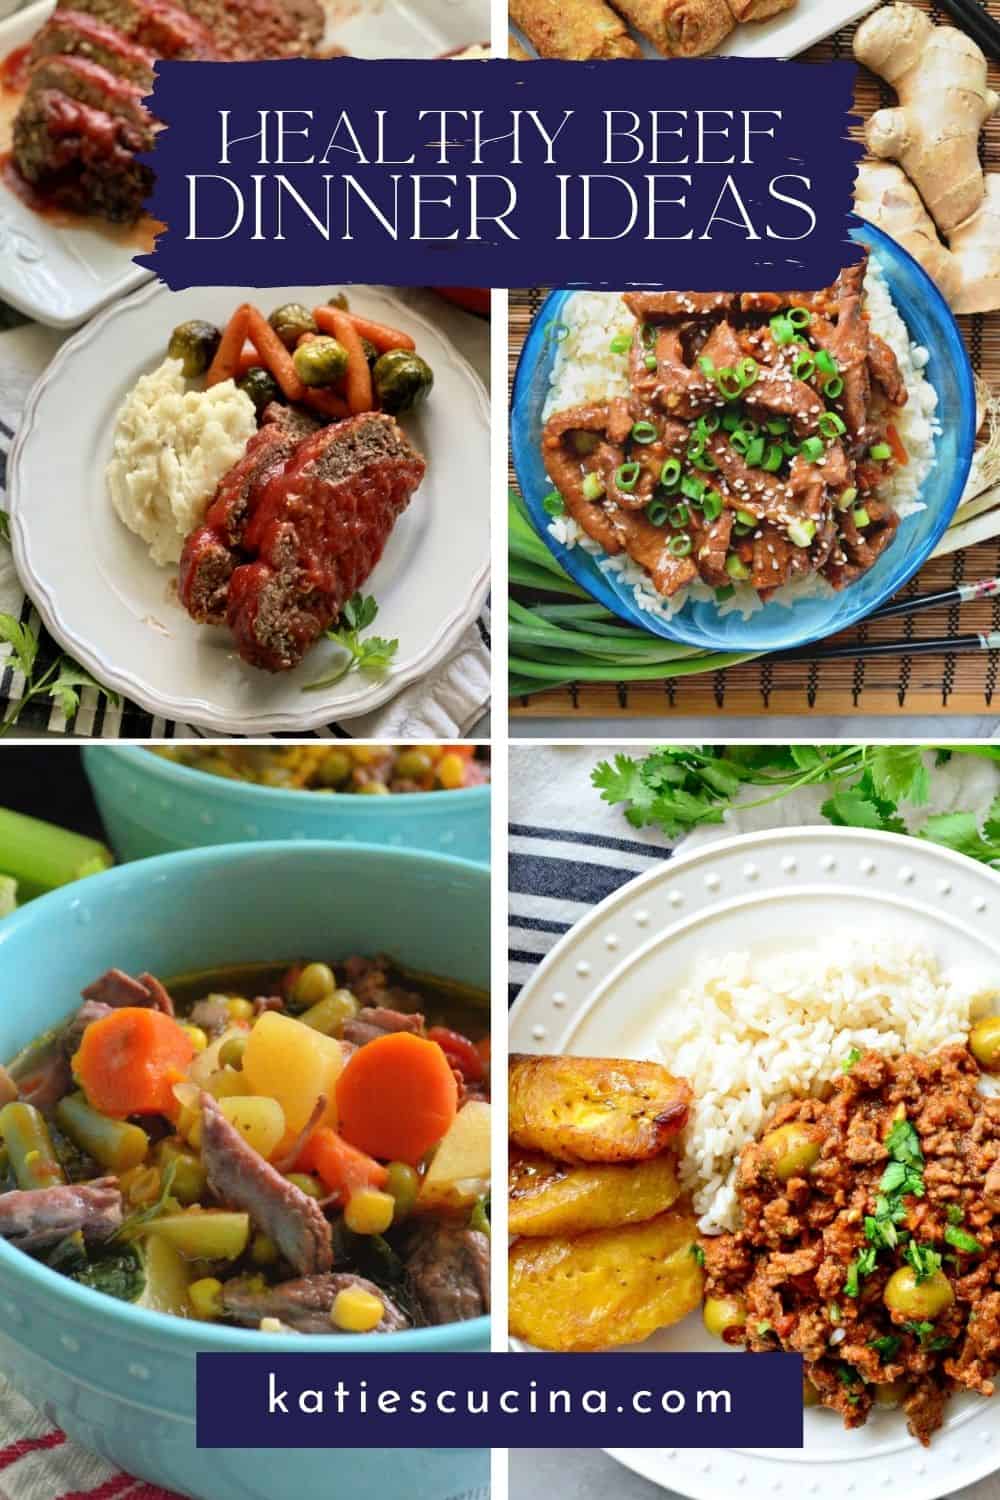 Four photos of recipes; meatloaf, beef soup, mongolian beef, and picadillo with text on image for Pinterest.